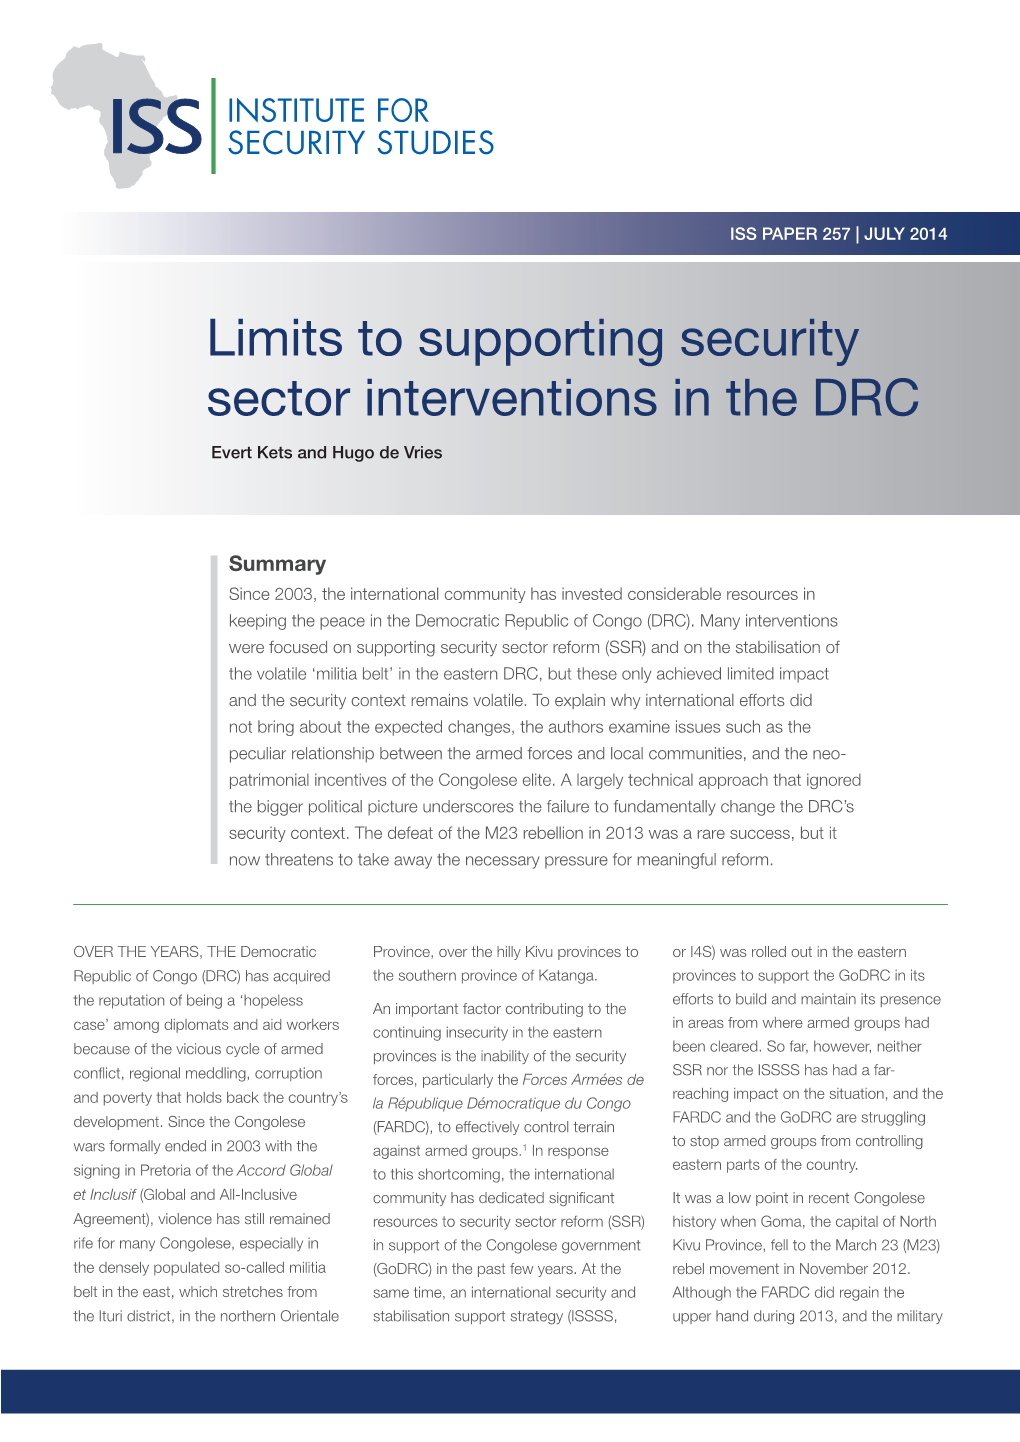 Limits to Supporting Security Sector Interventions in the DRC